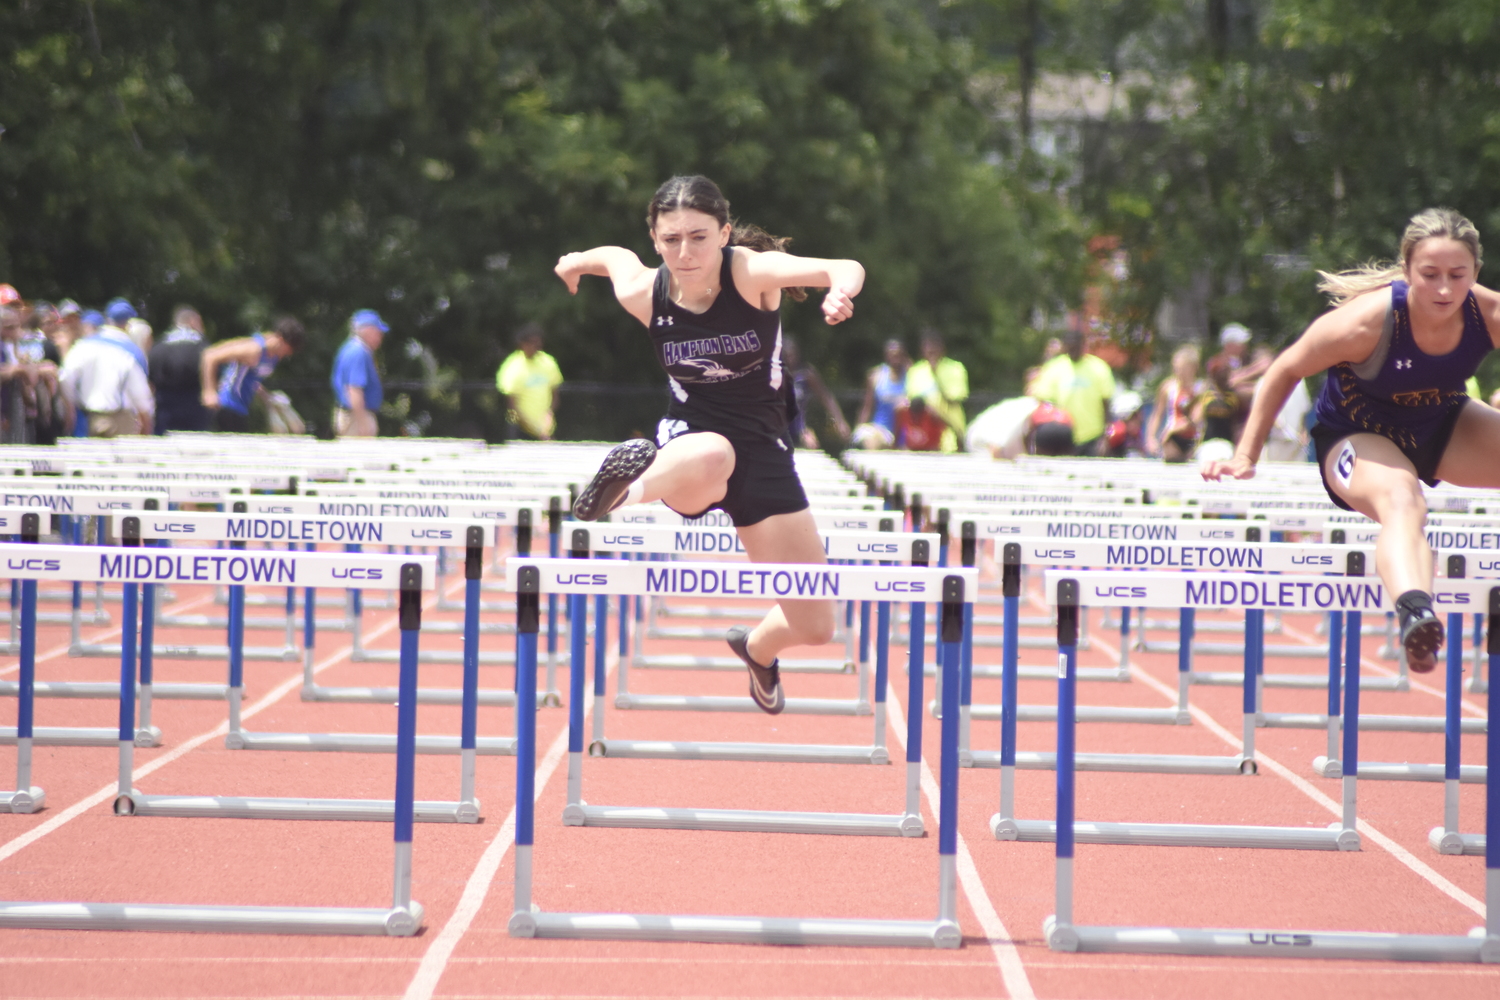 Emma Halsey reached the New York State Outdoor Track and Field Championships last spring in the hurdles.   DREW BUDD